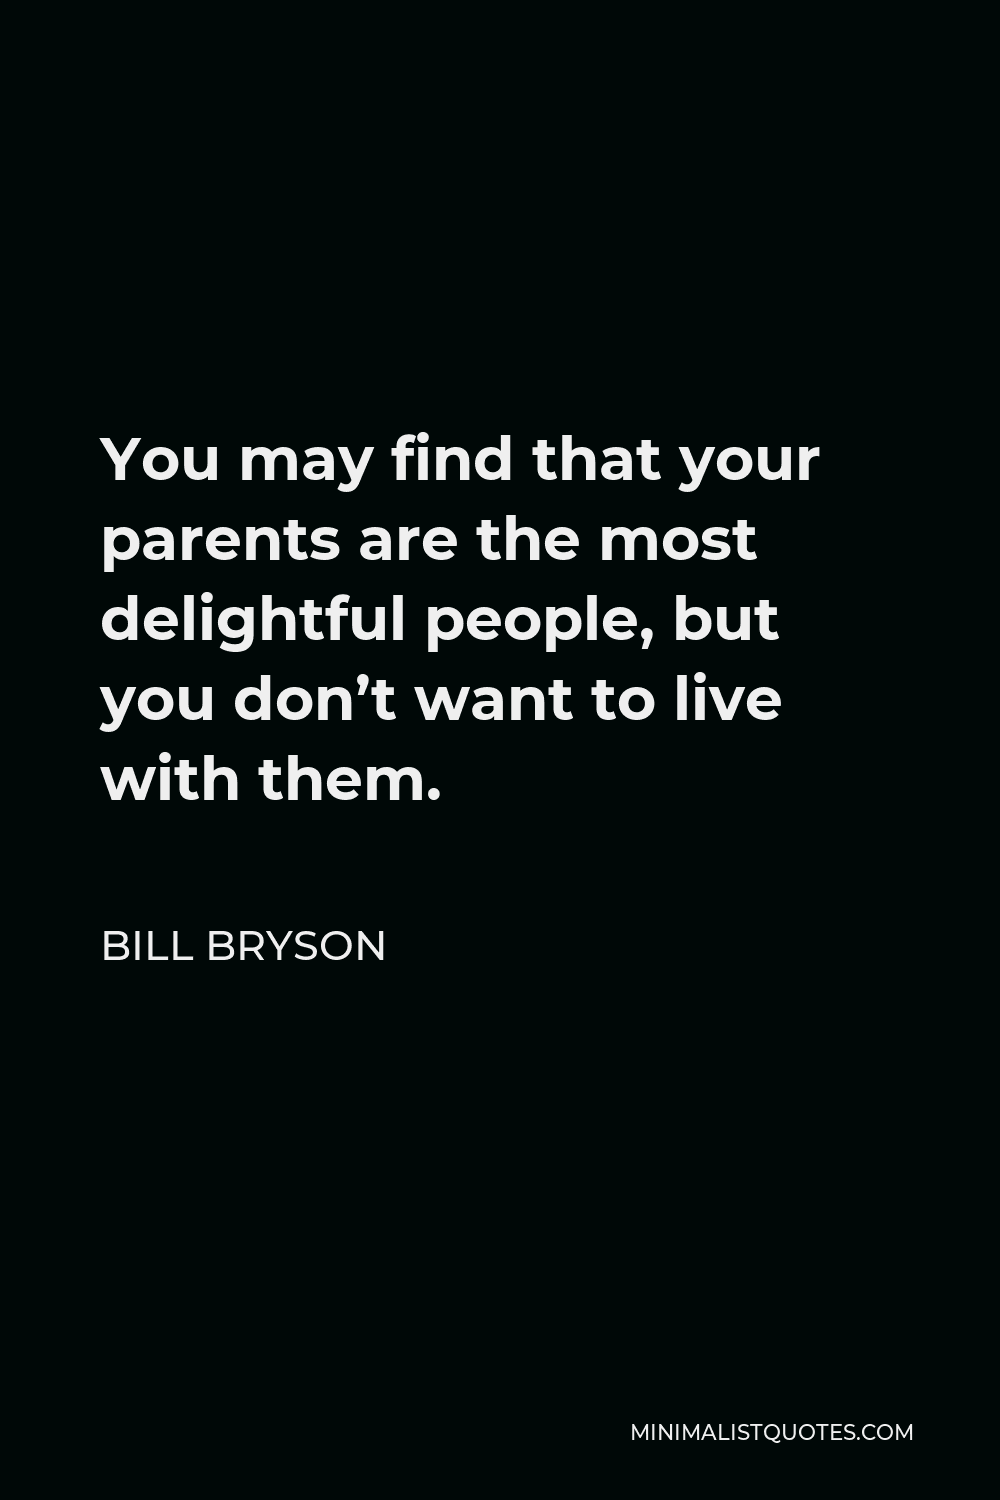 Bill Bryson Quote - You may find that your parents are the most delightful people, but you don’t want to live with them.